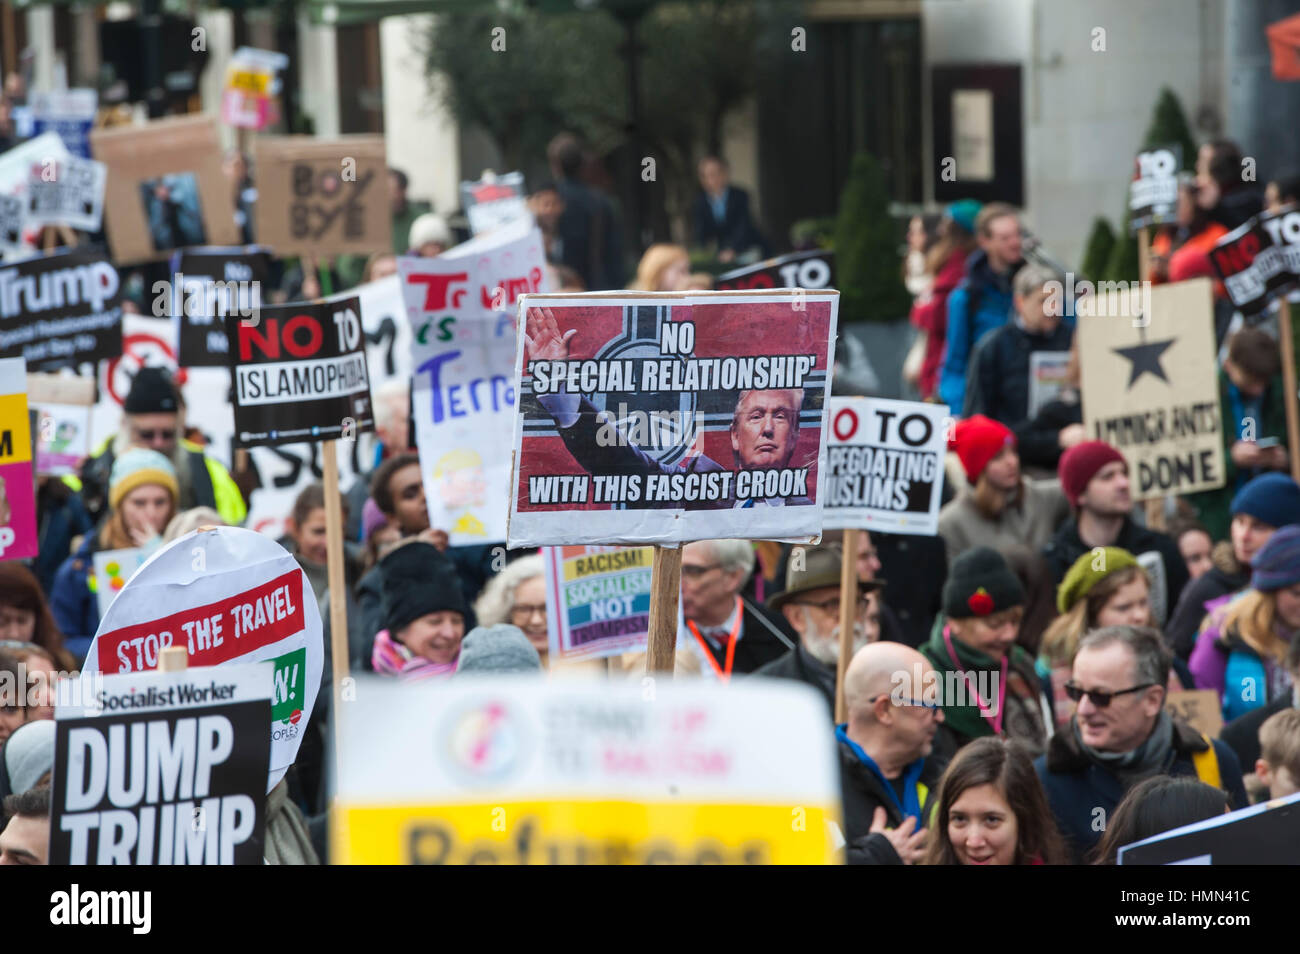 London England. 4th Feburary 2017. Thousands join rally against executive order suspending travel to the US from seven majority-Muslim countries ©Michael Tubi/Alamy Live News Stock Photo